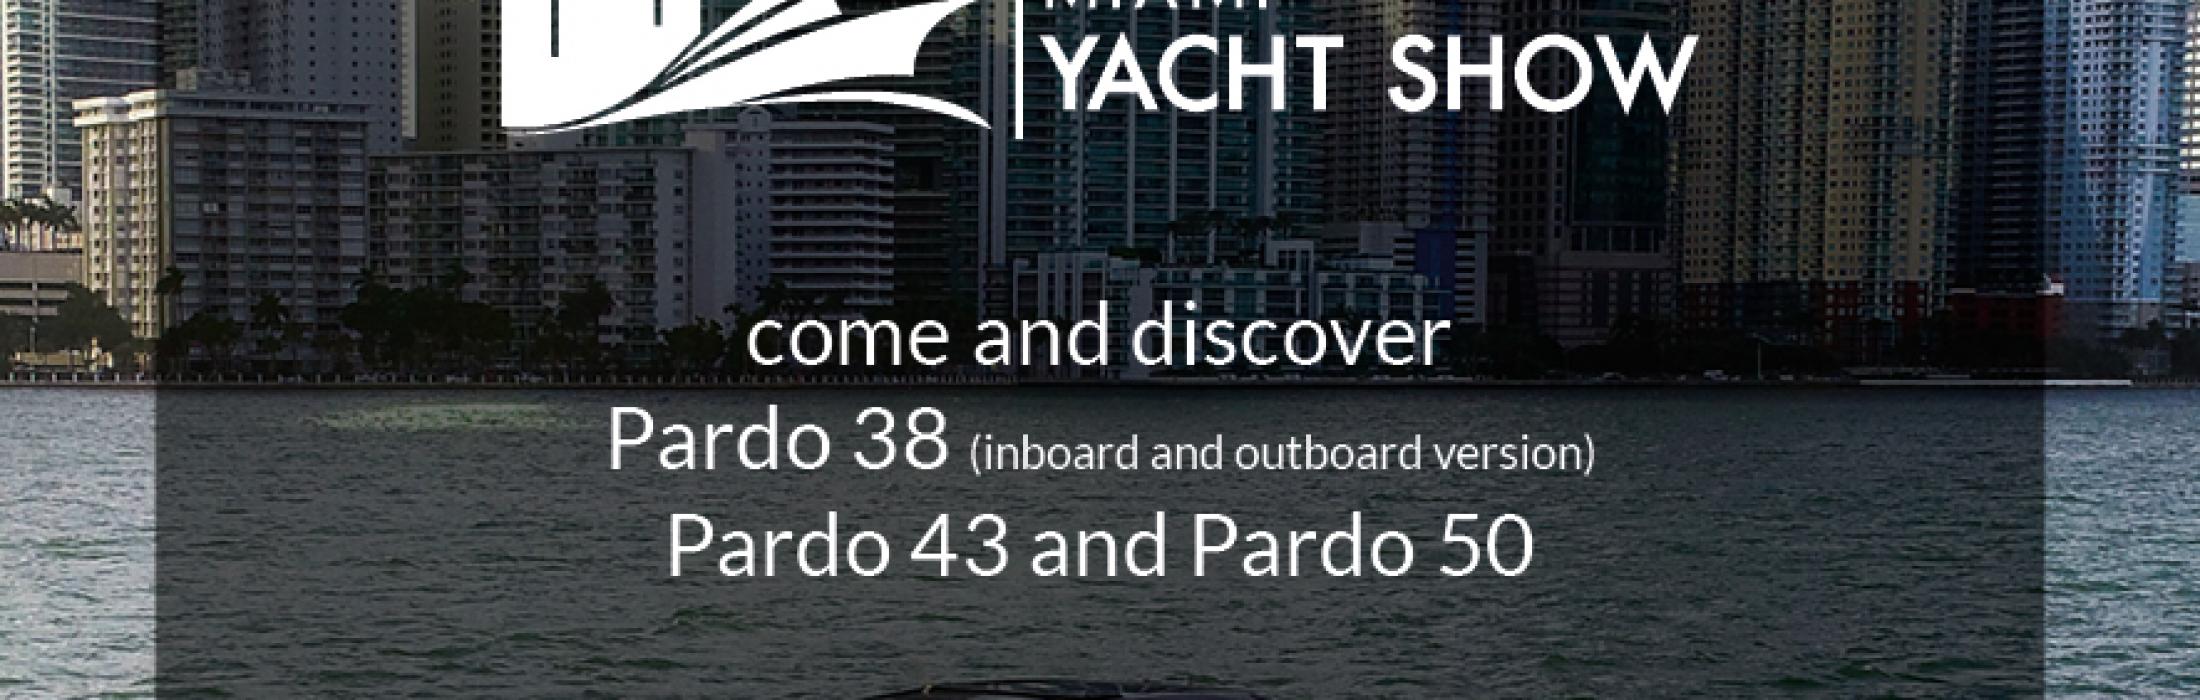 MIAMI YACHT SHOW 2020: SAVE THE DATE